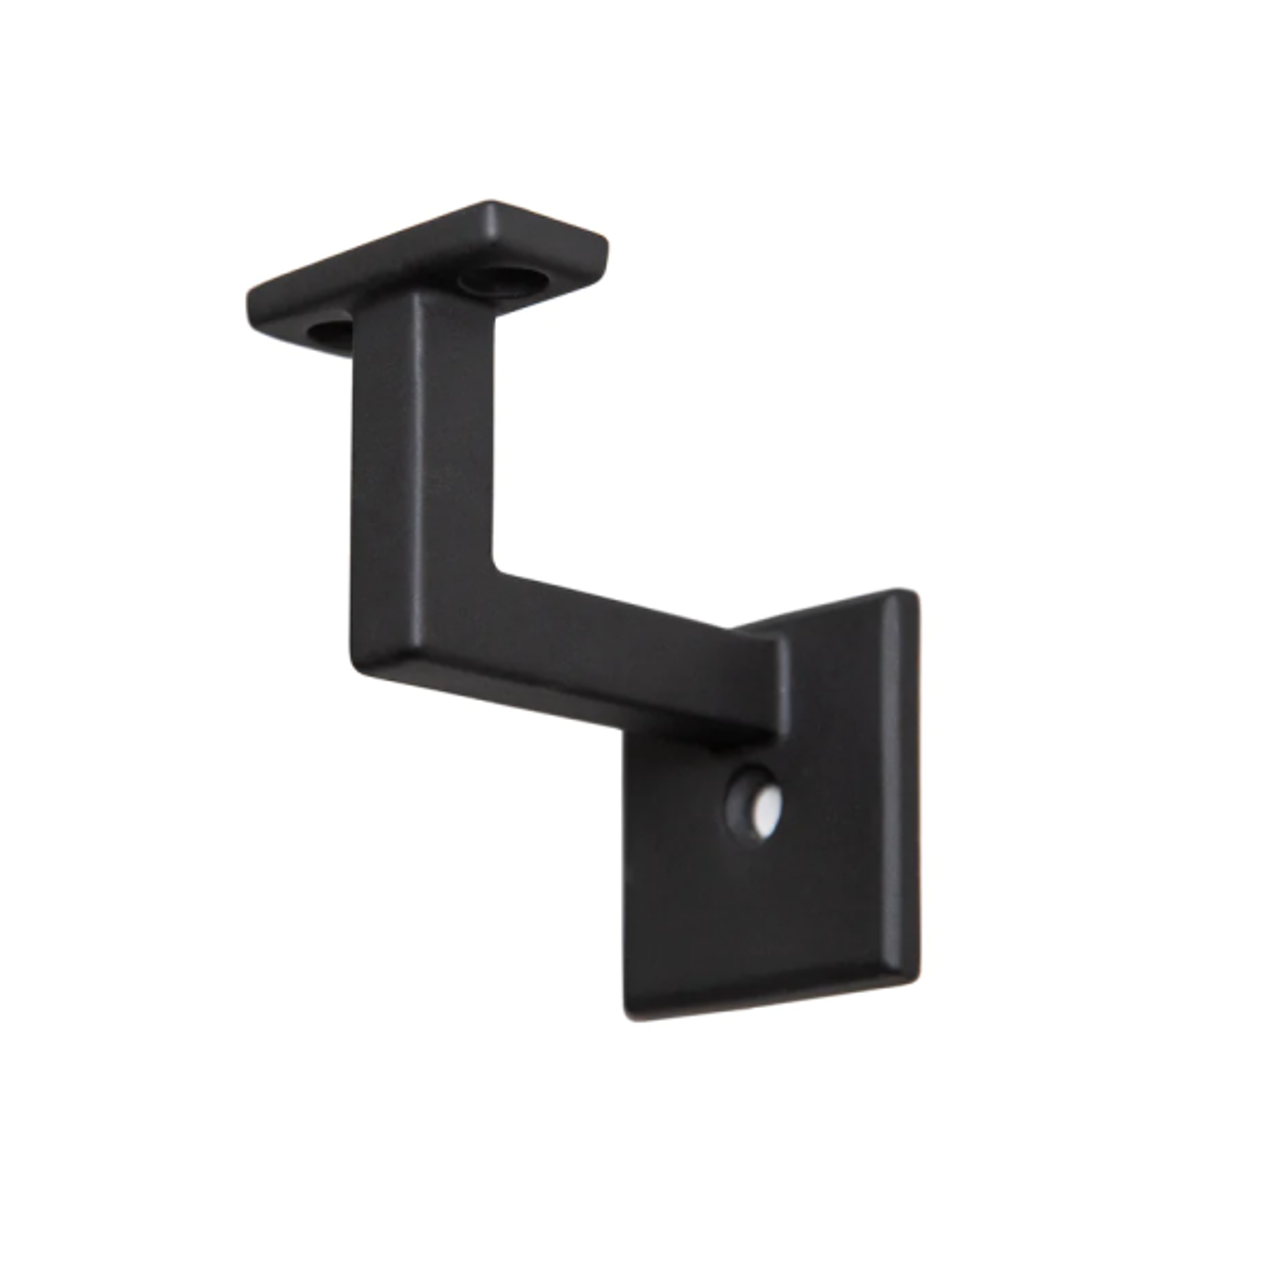 Cube Wall Bracket with Mount Screws